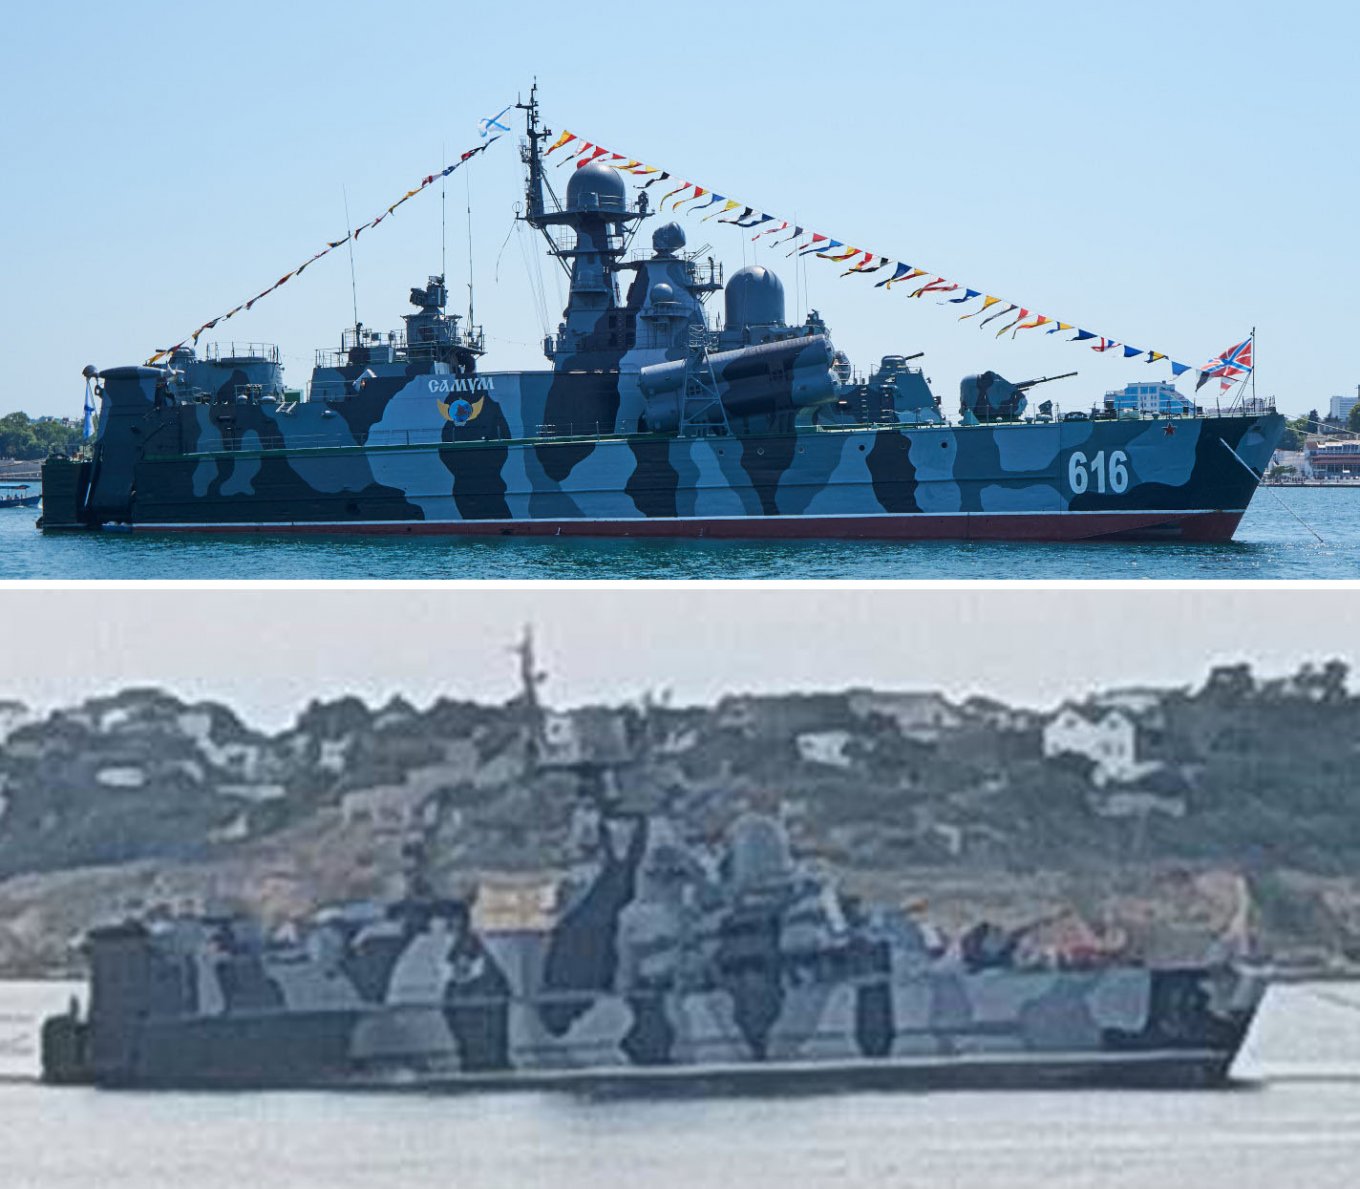 Samum corvette of Project 1239 before and after the drone attack